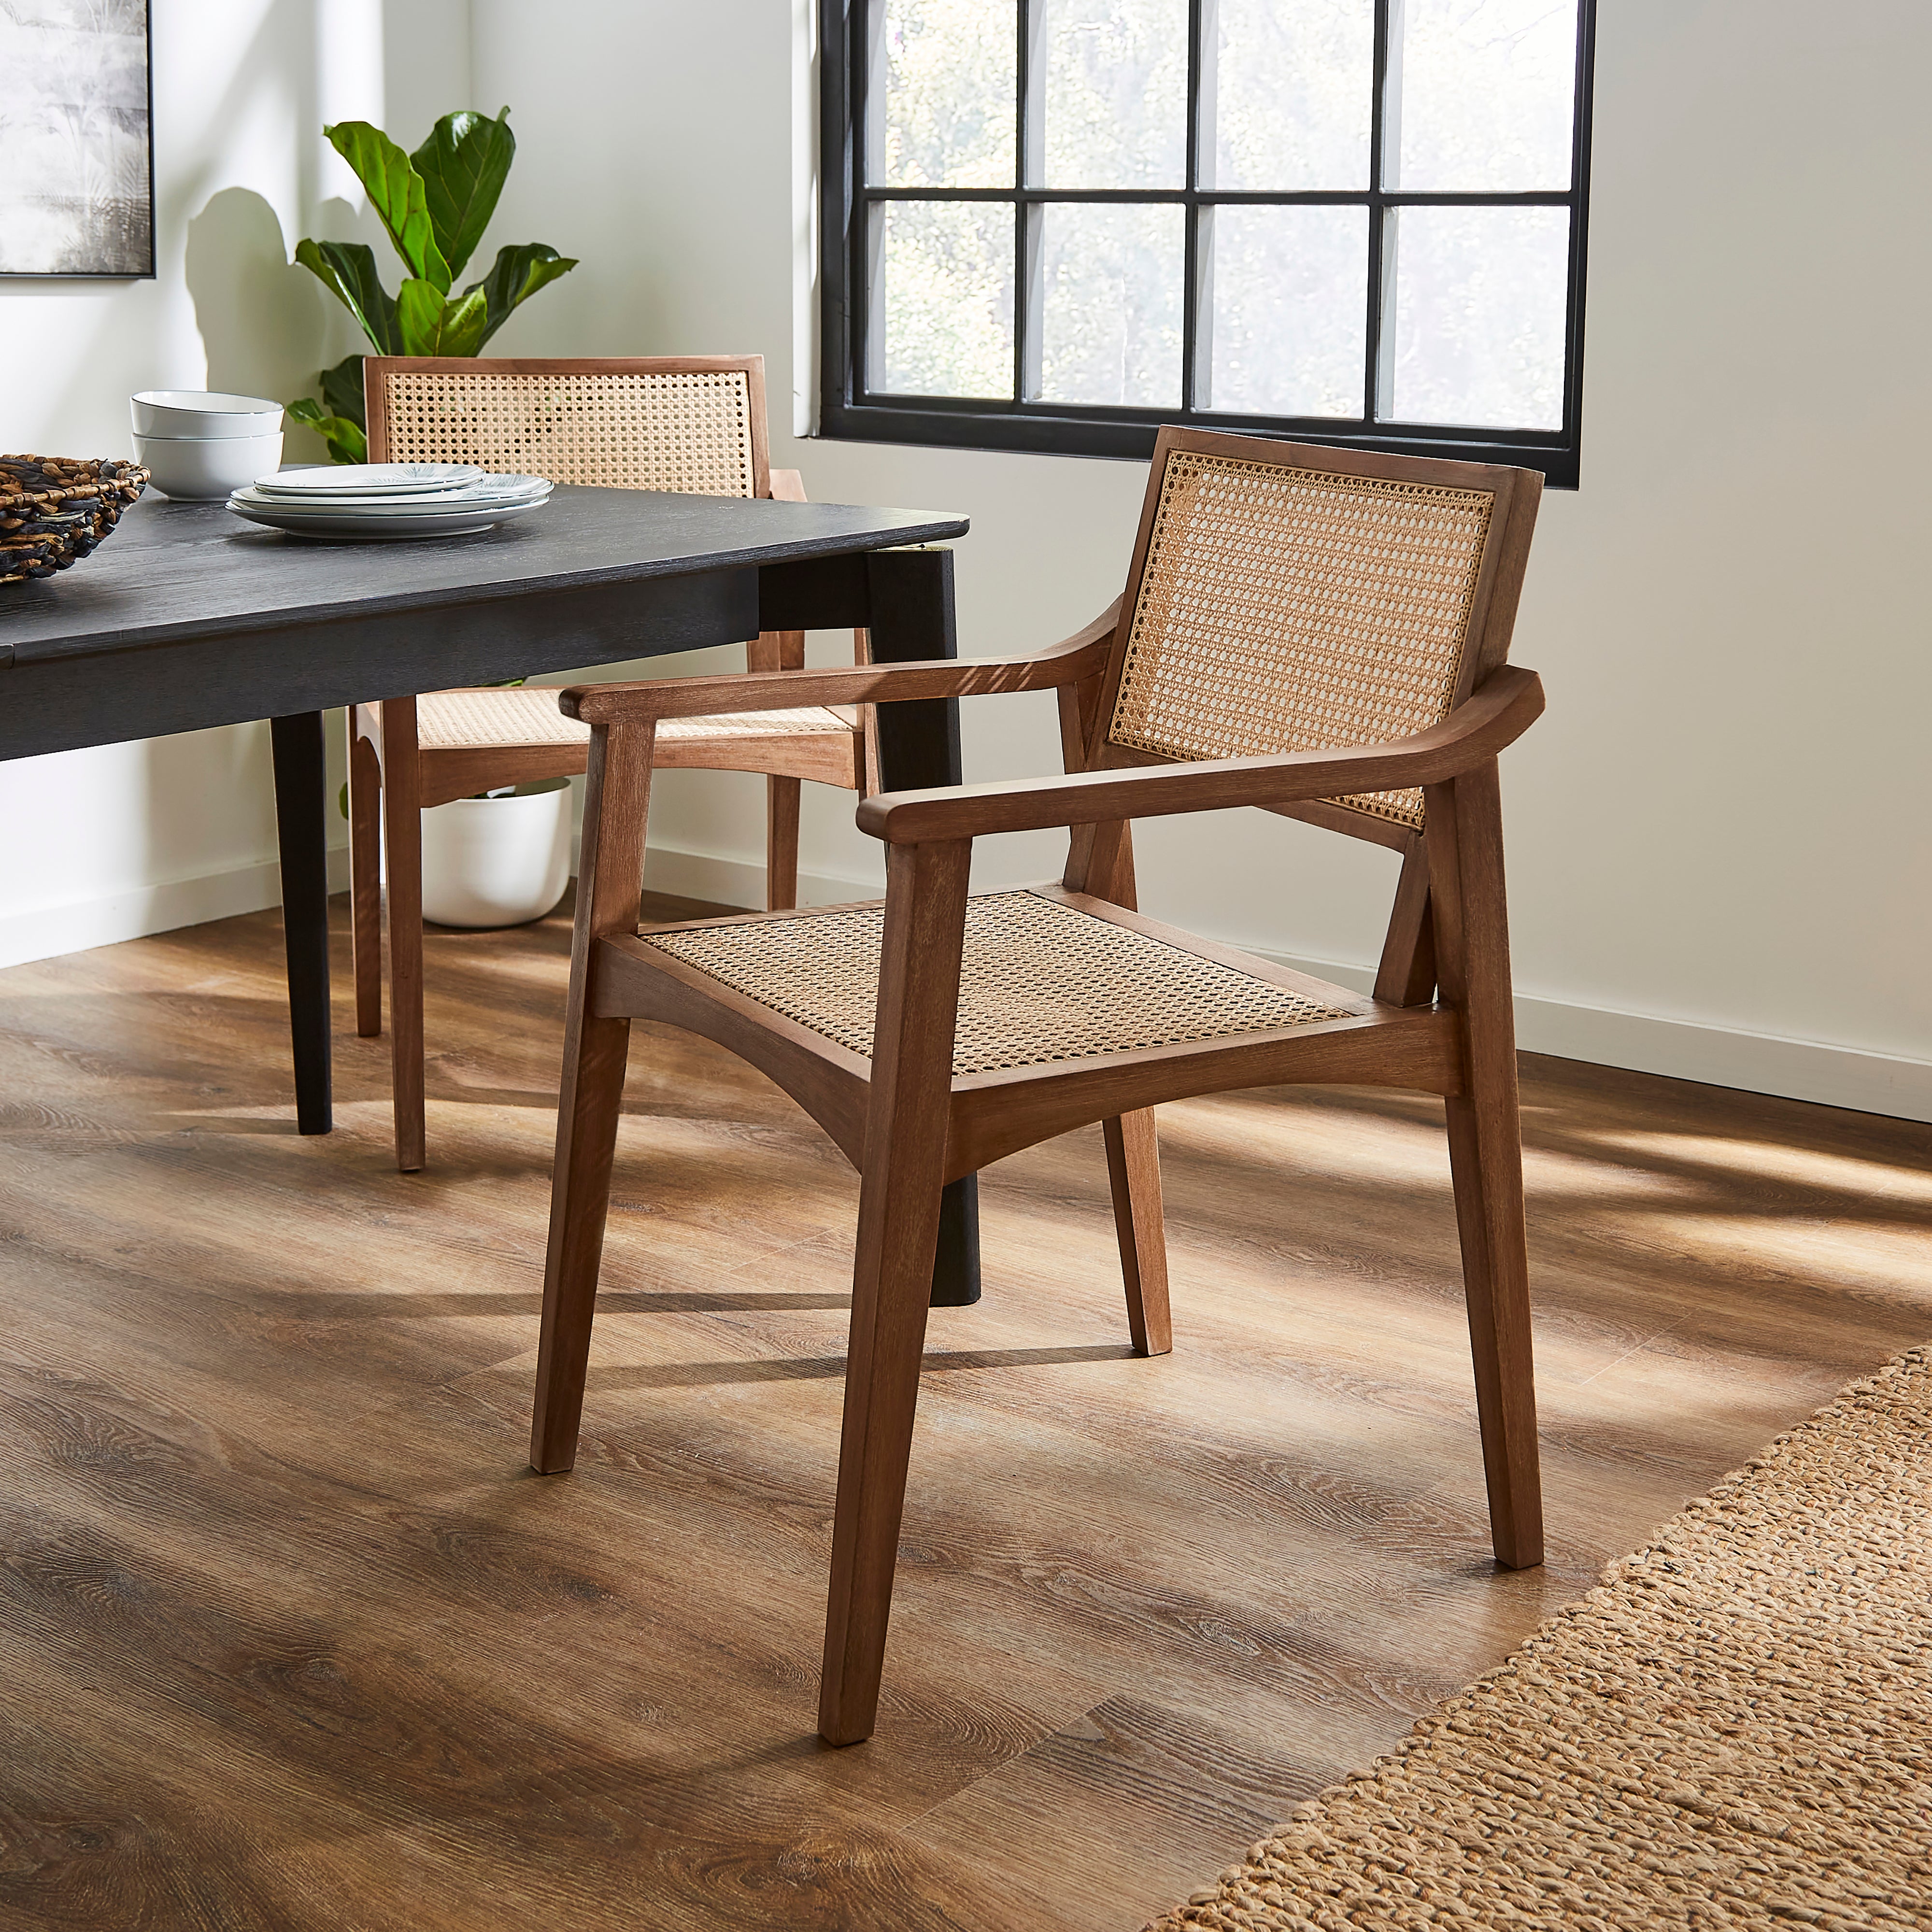 Giselle Dining Chair Mango Wood Natural